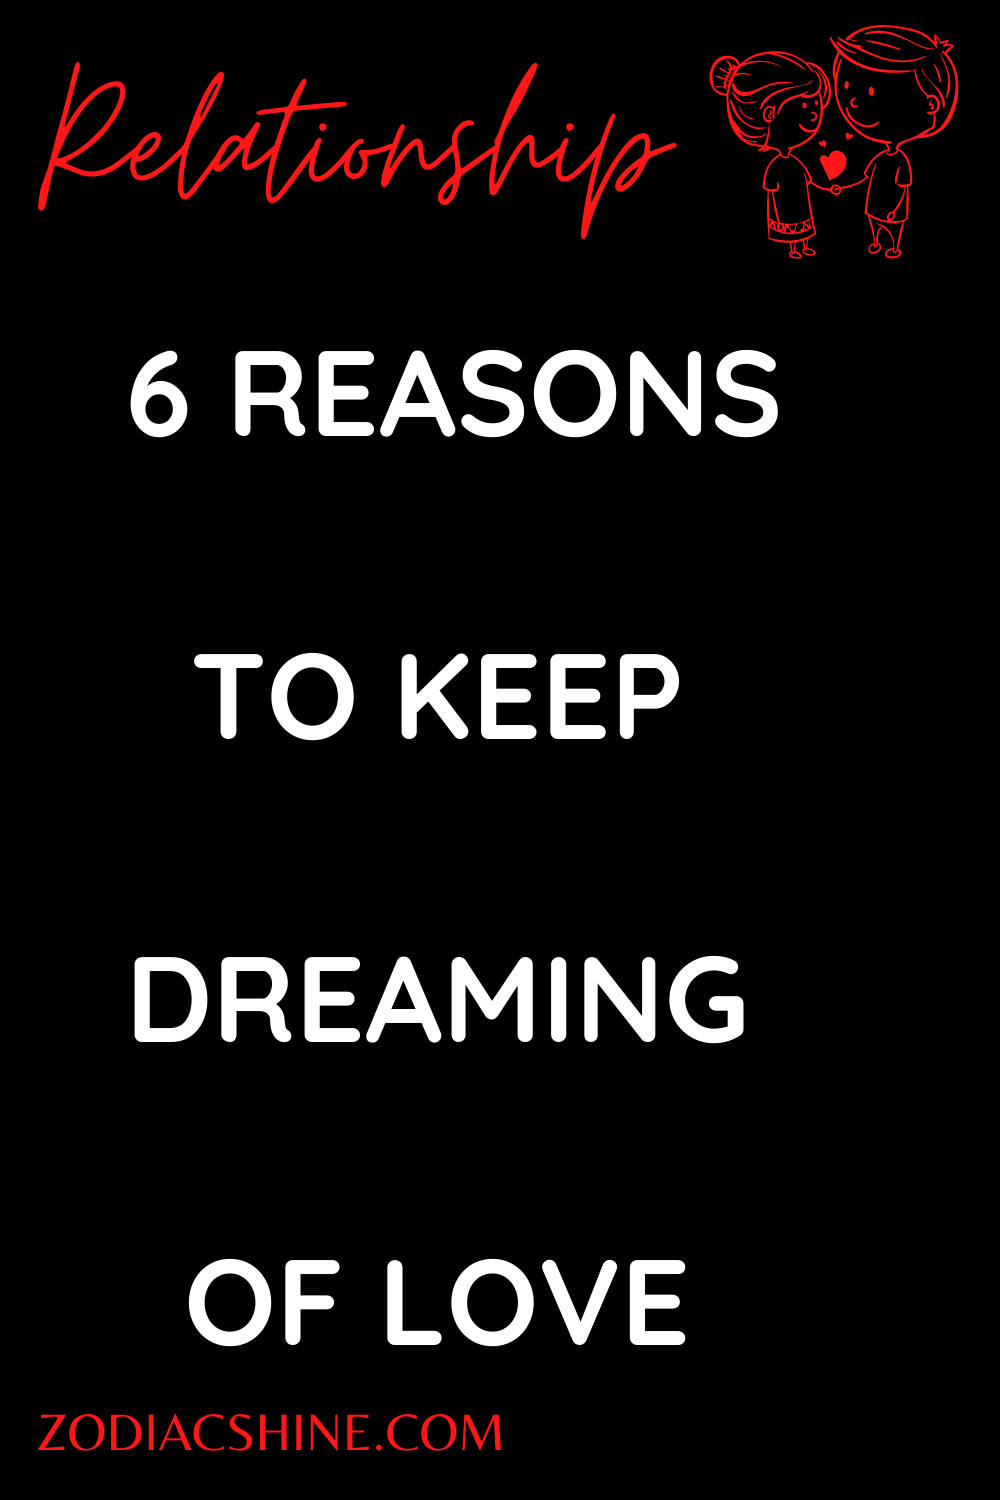  6 REASONS TO KEEP DREAMING OF LOVE